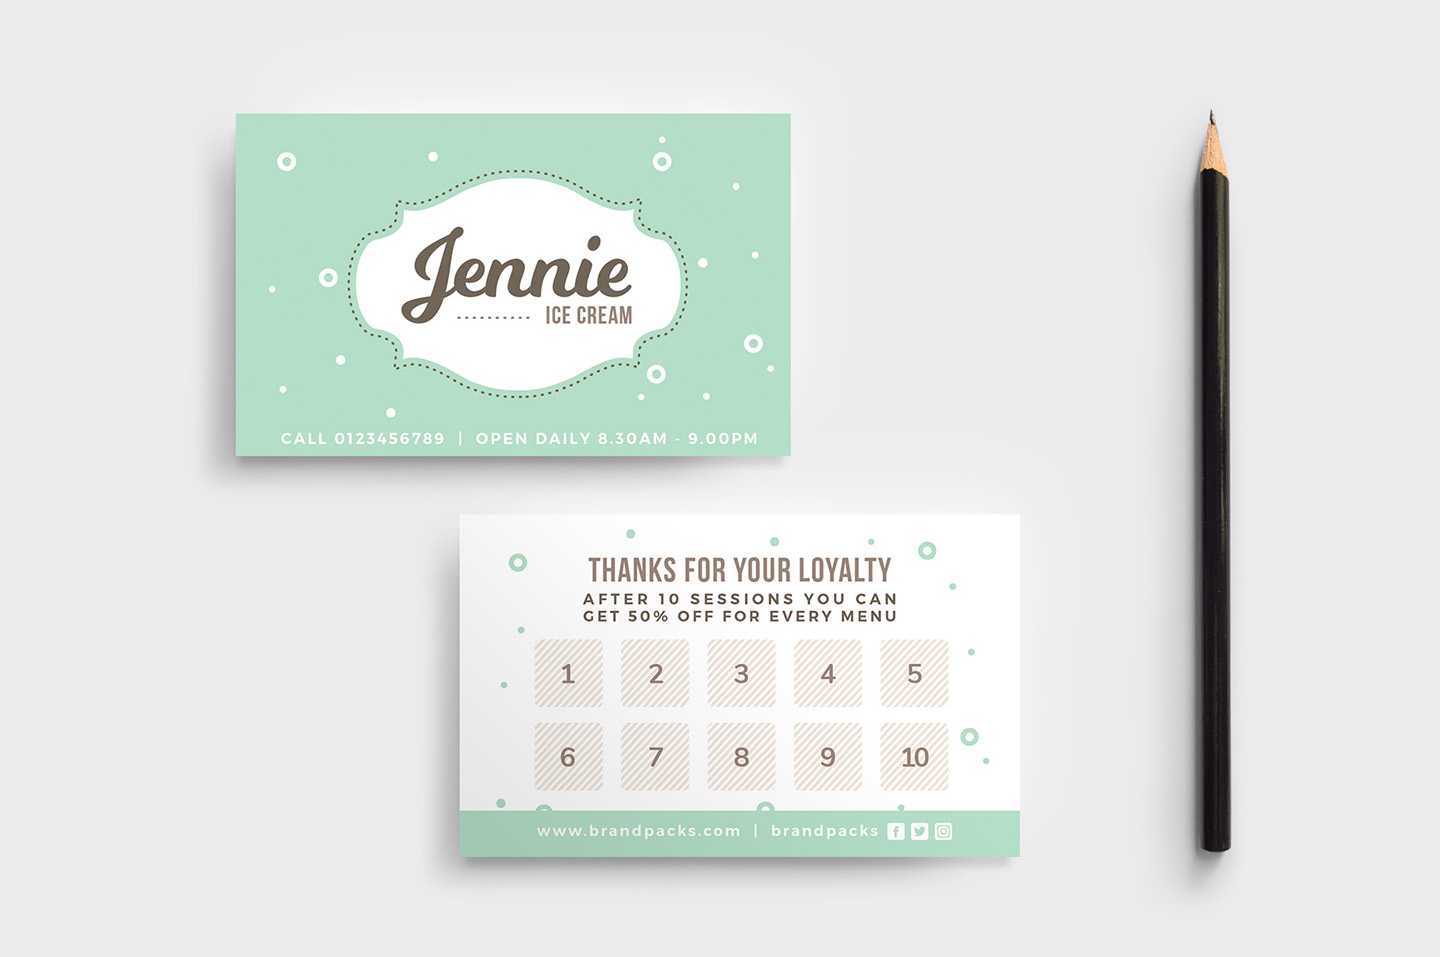 Free Loyalty Card Templates - Psd, Ai & Vector - Brandpacks Pertaining To Loyalty Card Design Template